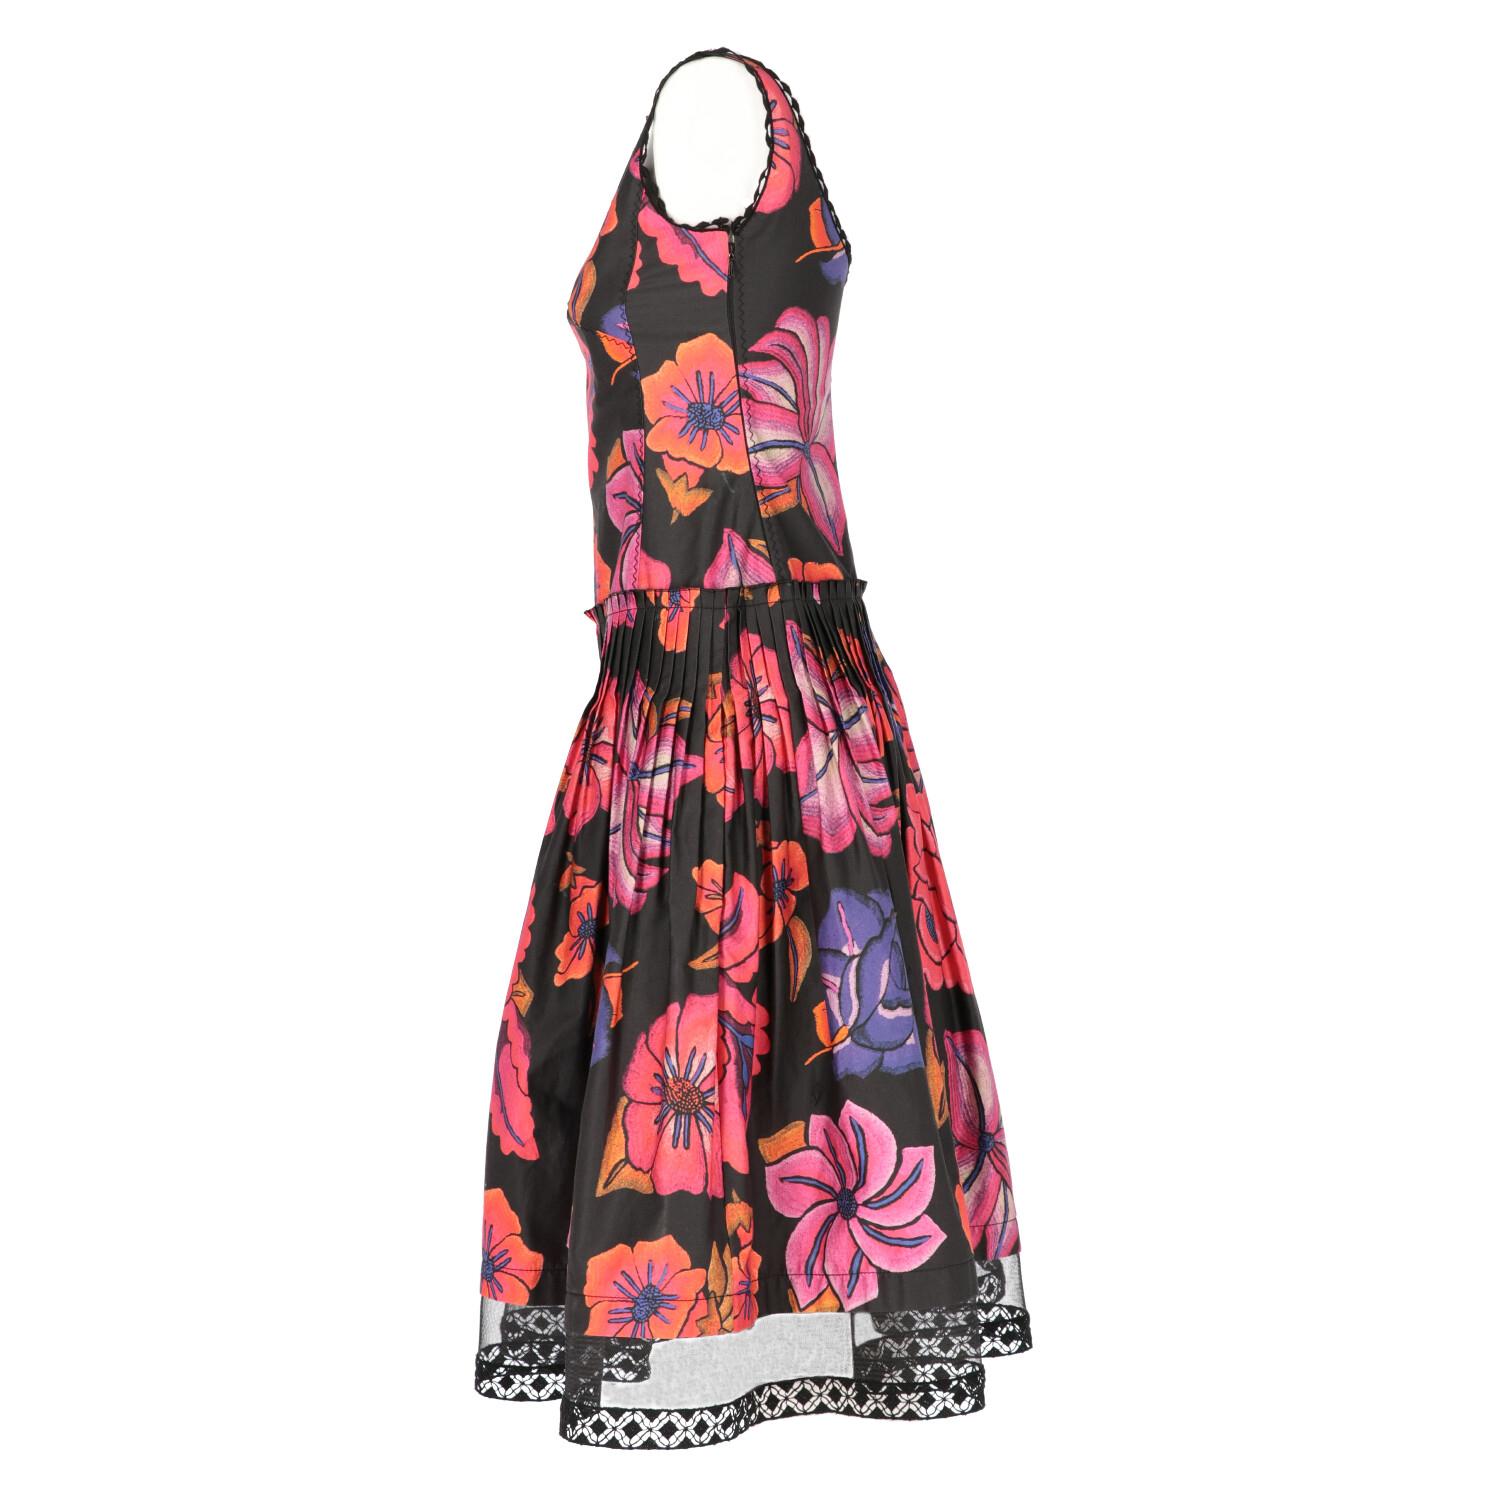 Alberta Ferretti black cotton dress with floral print. Model with round neckline, sleeveless and darts at the waist. Rigid tulle bottom and trimmed with trimmings. Invisible side zip closure.

Years: 2000s

Made in Italy

Size: 40 IT

Flat